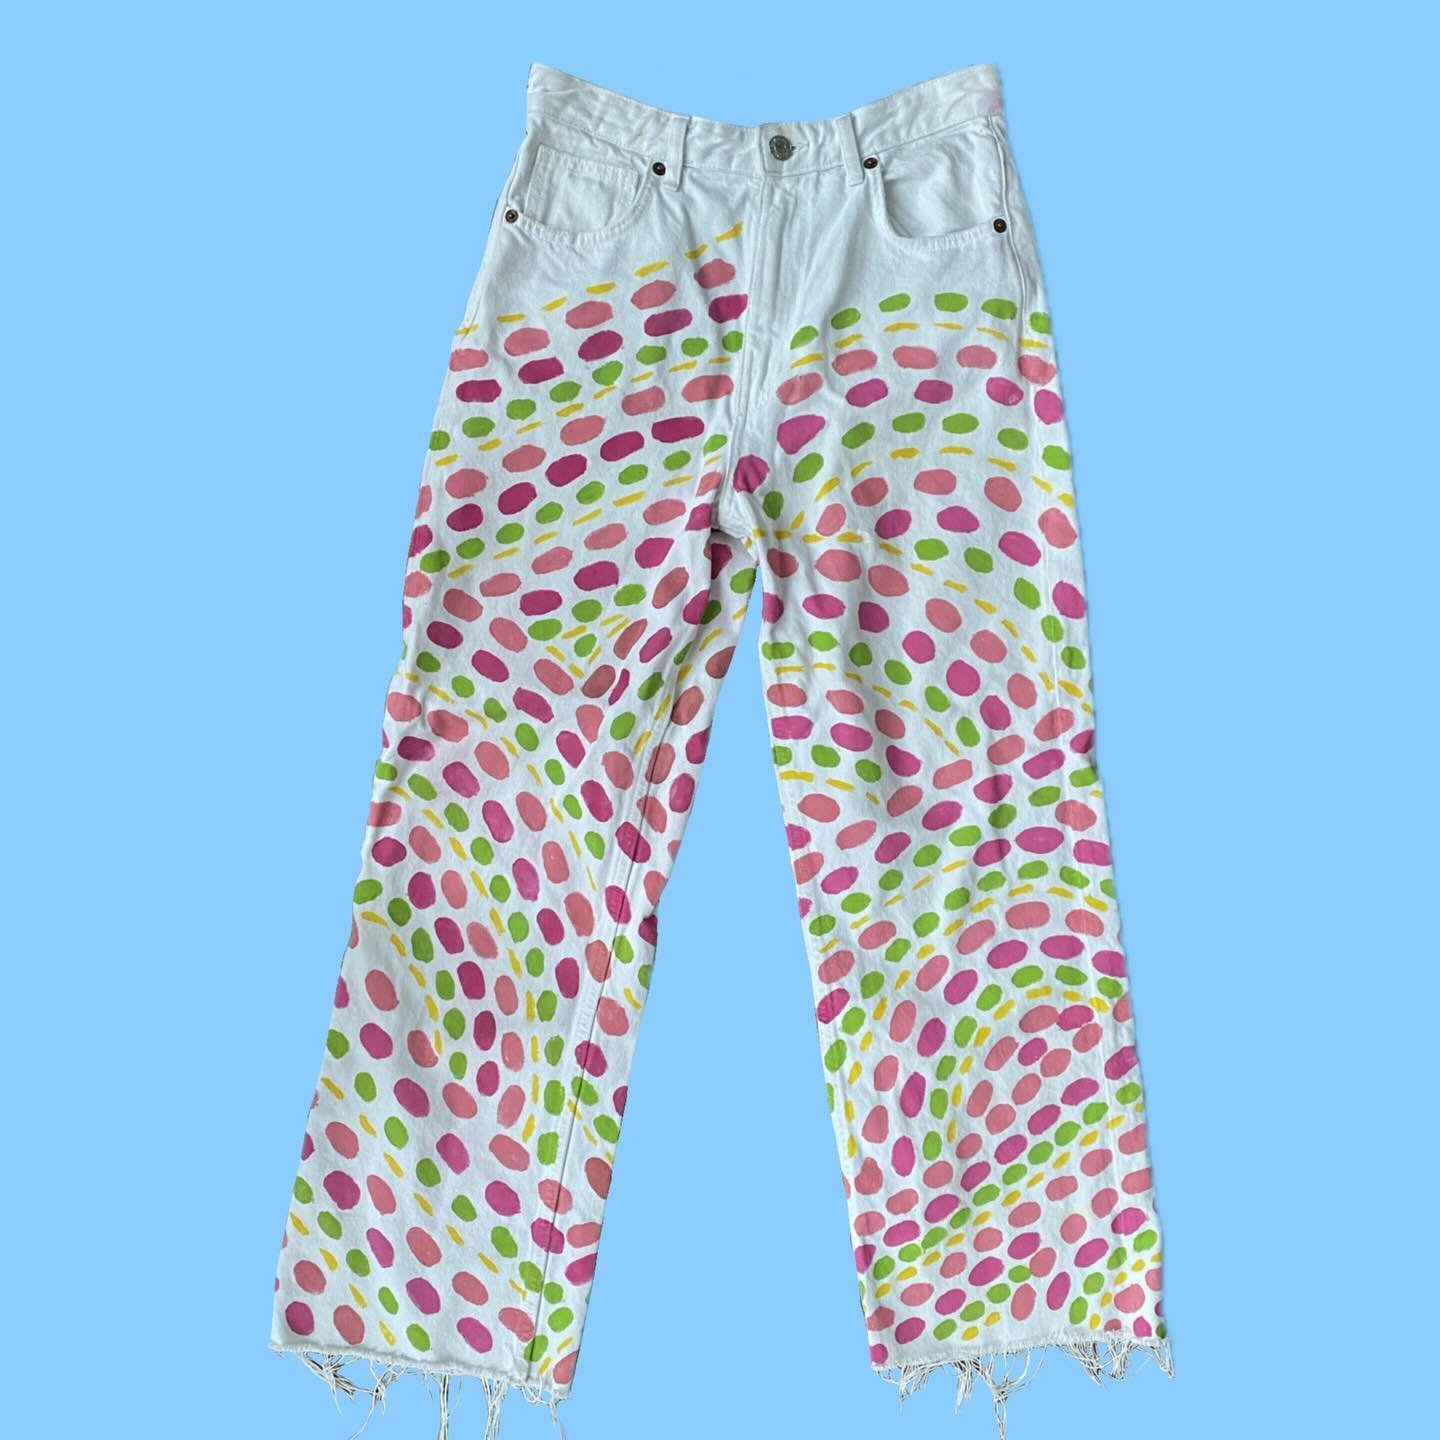 These pants were such a gift to make! I finger painted almost every inch of these pants and my inner child sang the whole time! Messes continue to be so healing, especially when painting fabric. I can&rsquo;t wait to see these pants go to a good home